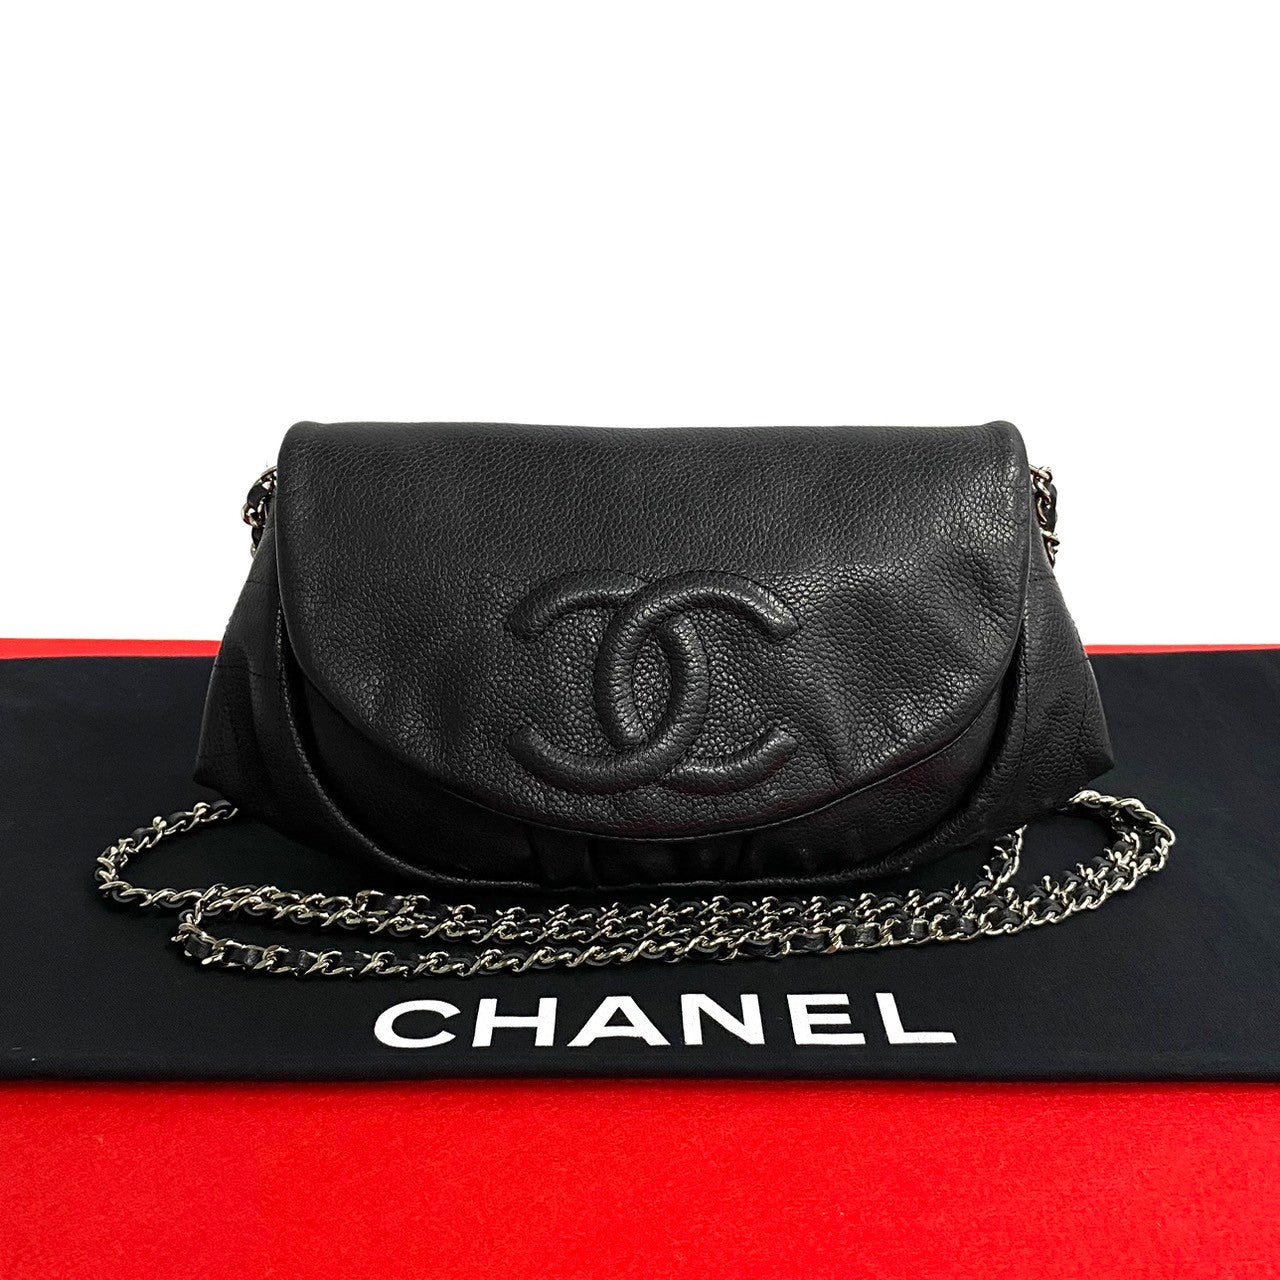 Chanel Half Moon Chain Wallet Leather Shoulder Bag 12番台 in Good condition